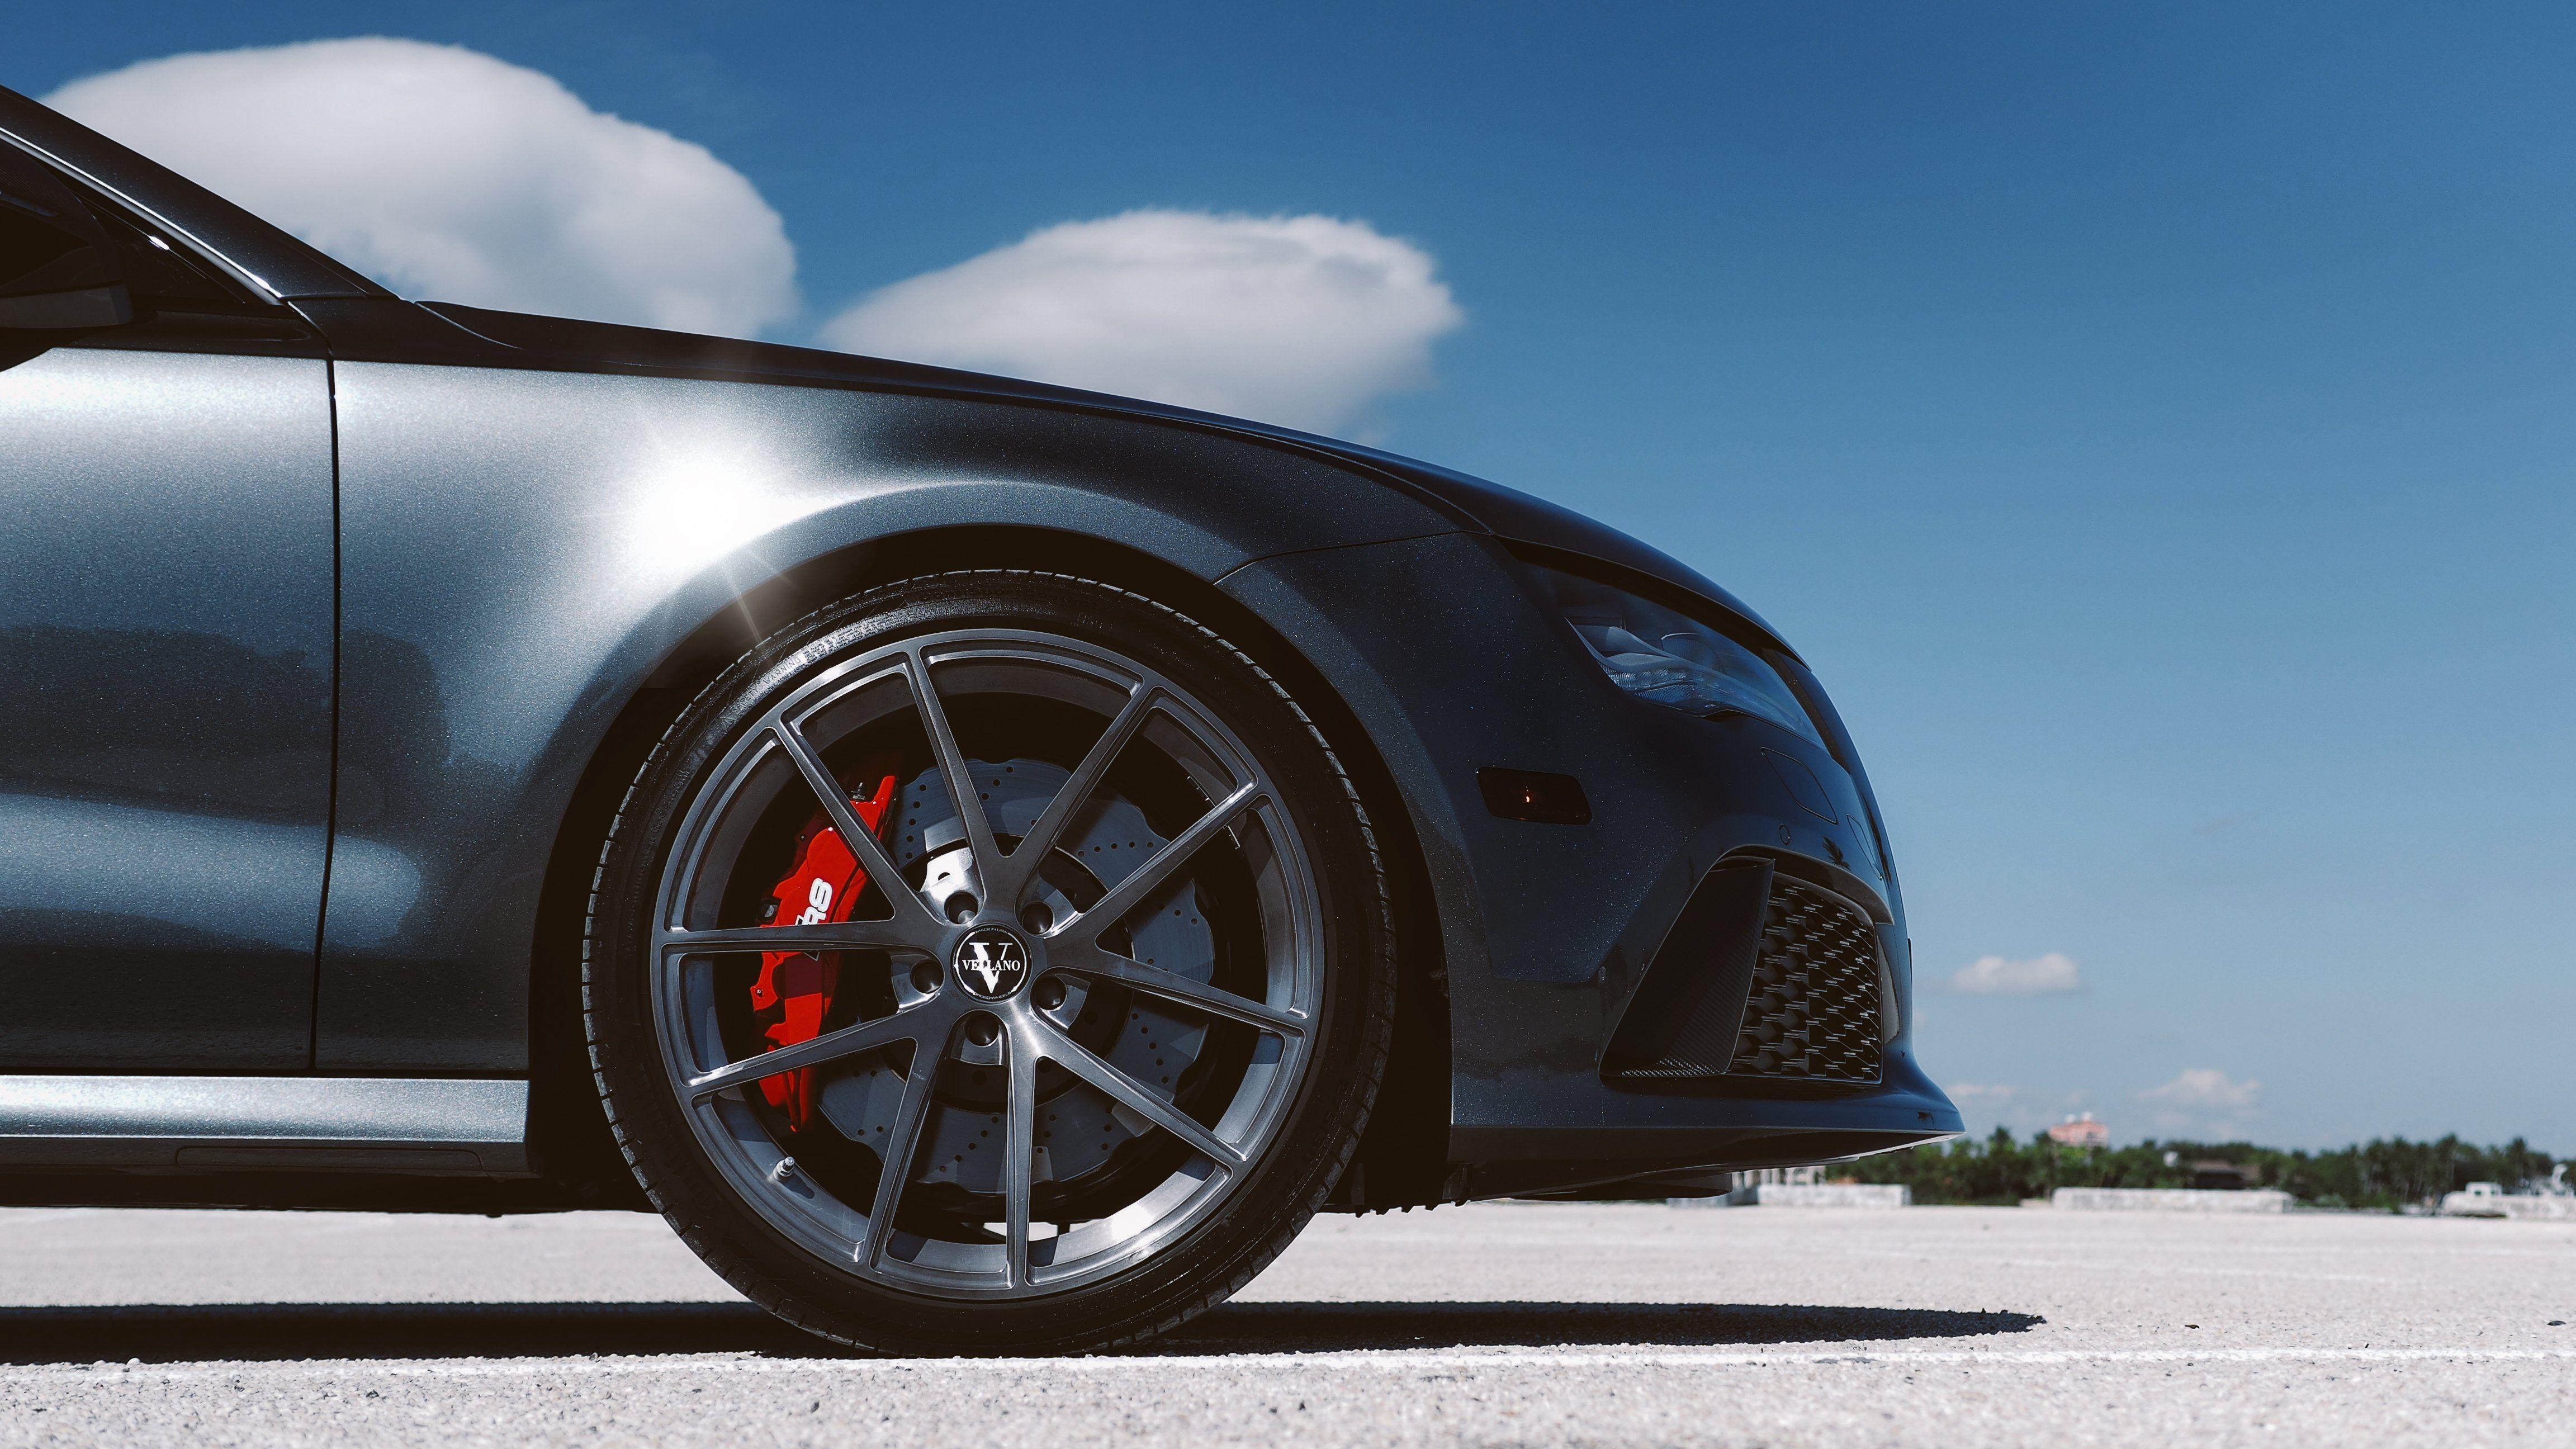 Audi RS7 Background 36962 4608x2592 px